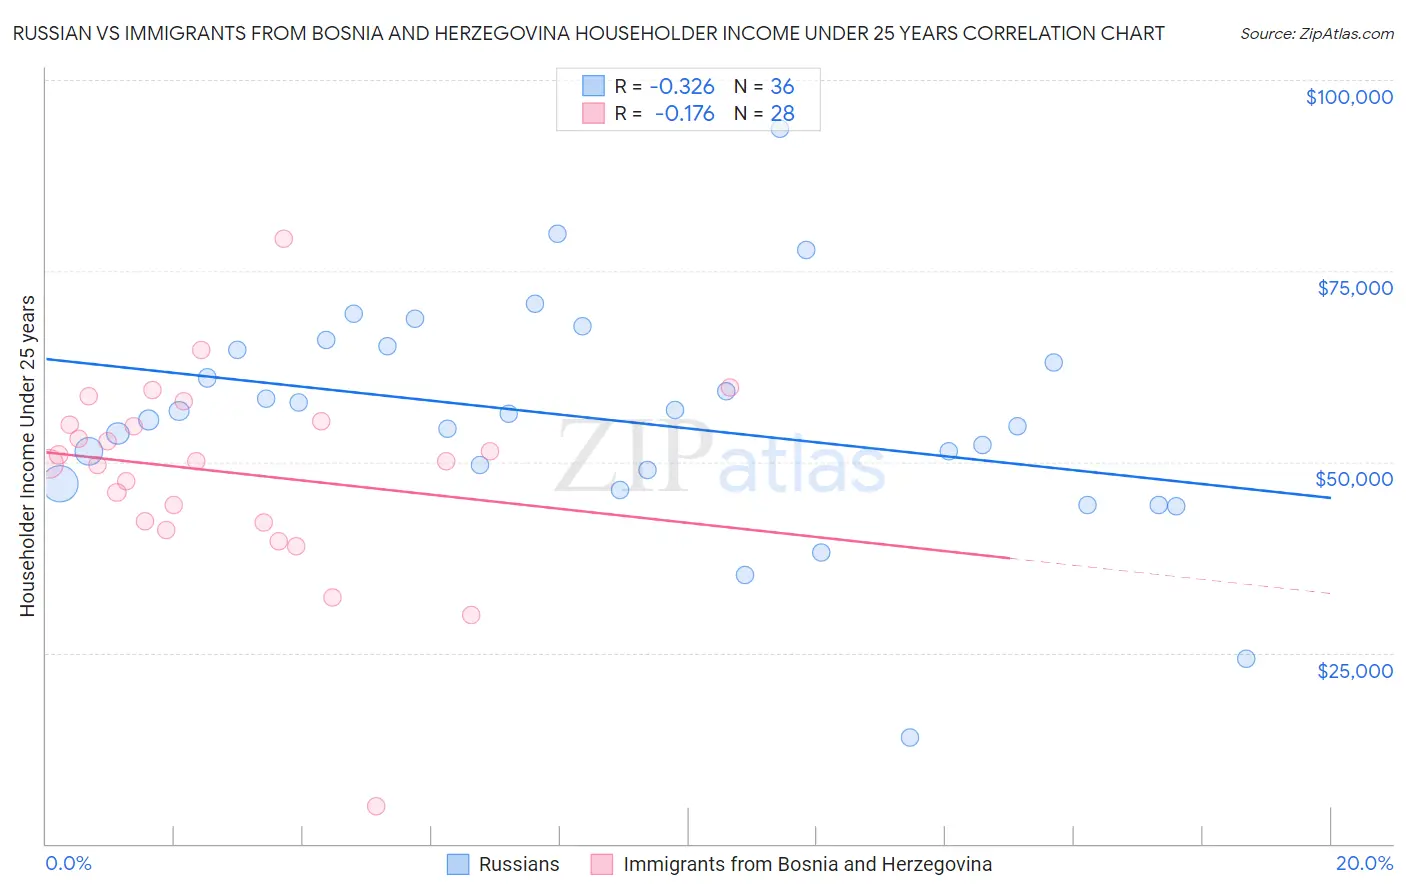 Russian vs Immigrants from Bosnia and Herzegovina Householder Income Under 25 years